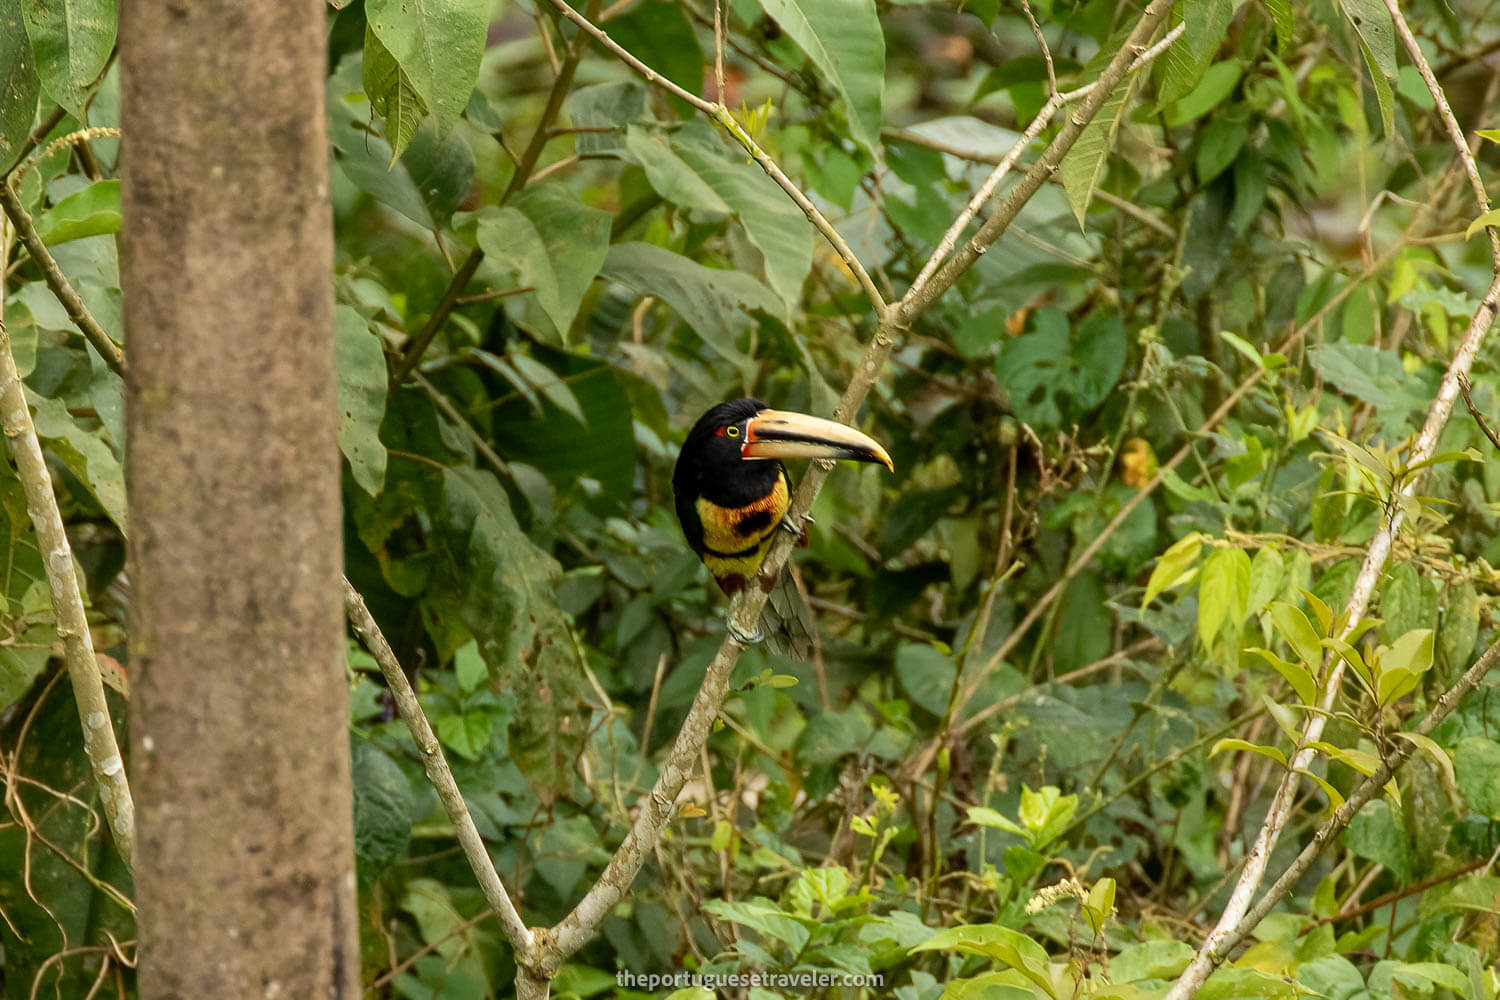 A Pale Mandibled Aracari Toucan on the Birdwatching Tour in Mindo